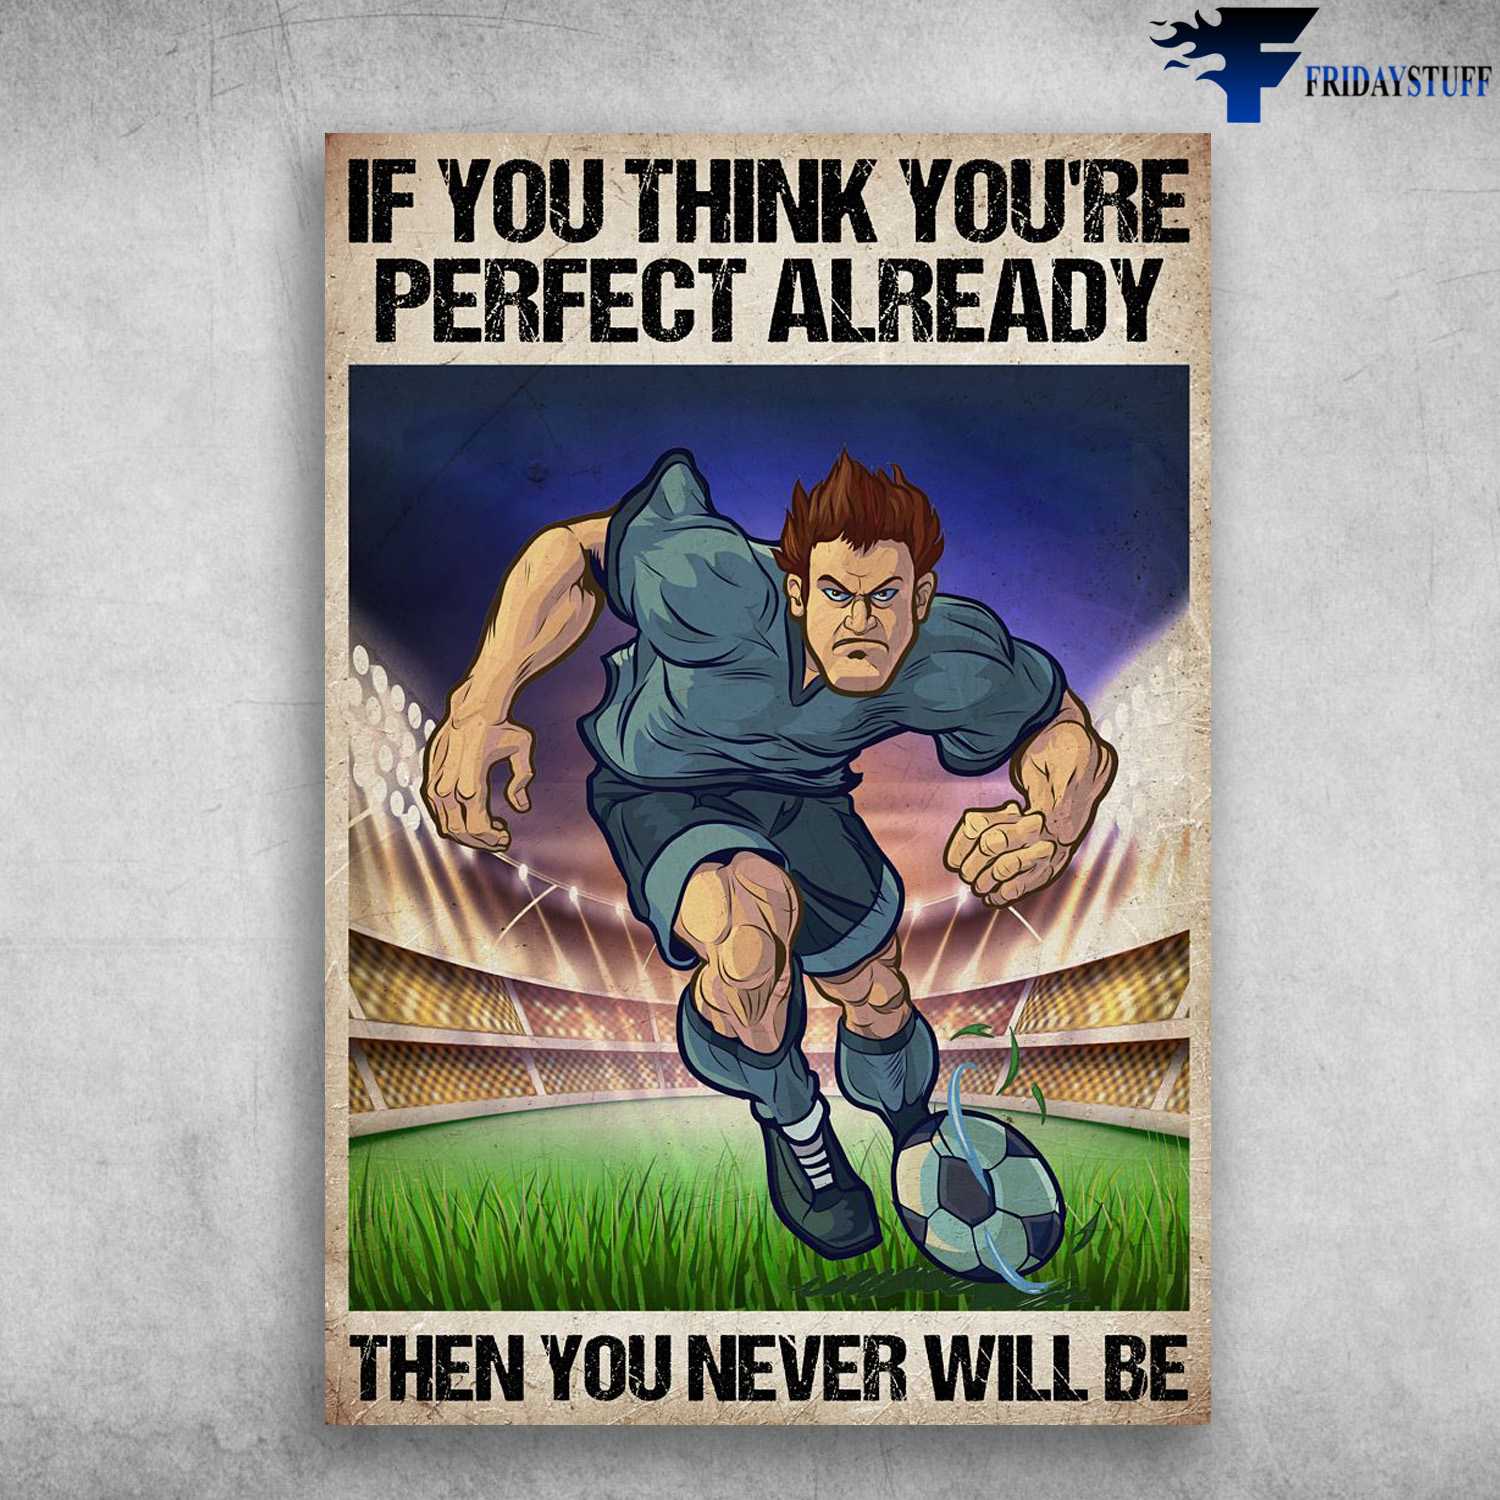 Soccer Player, Soccer Poster, If You Think You're Perfect Already, Then You Never Will Be